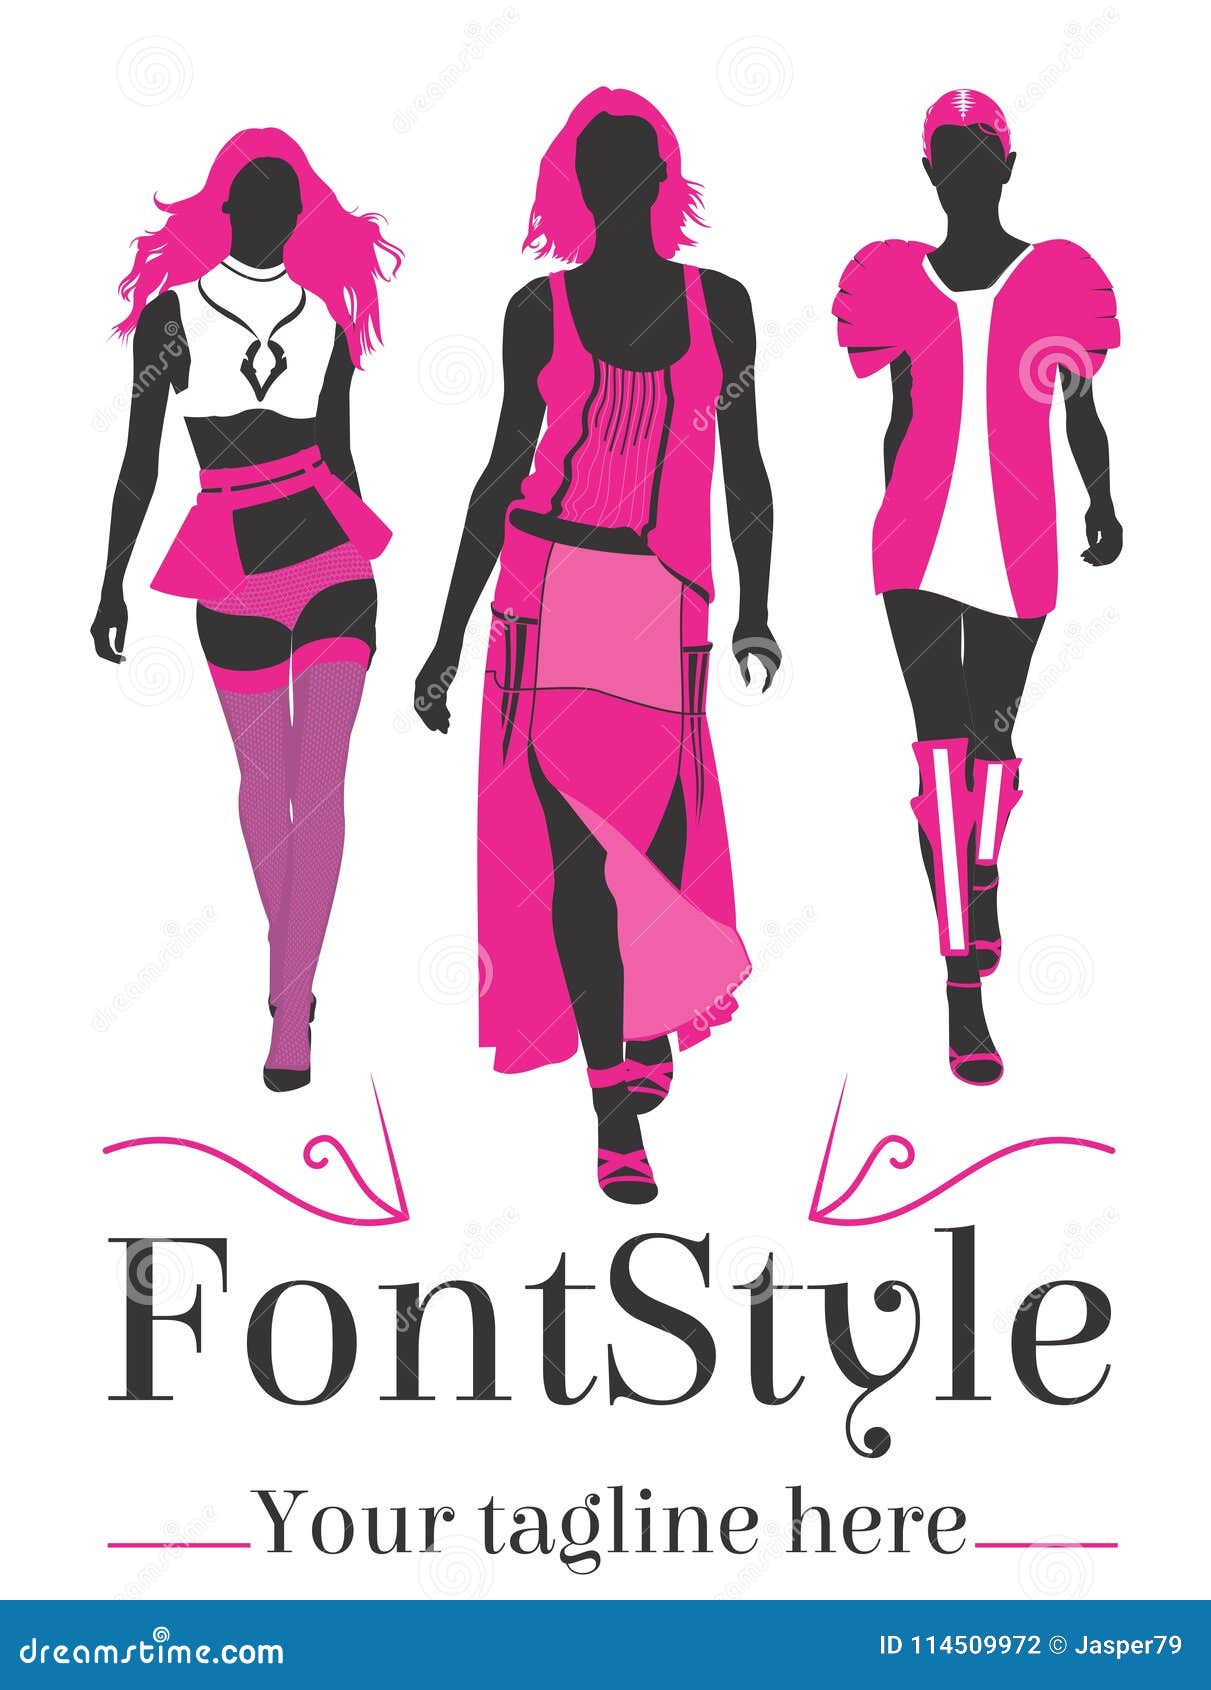 Fashion Logo with Three Model Walking on the Catwalk Stock Vector - of style: 114509972